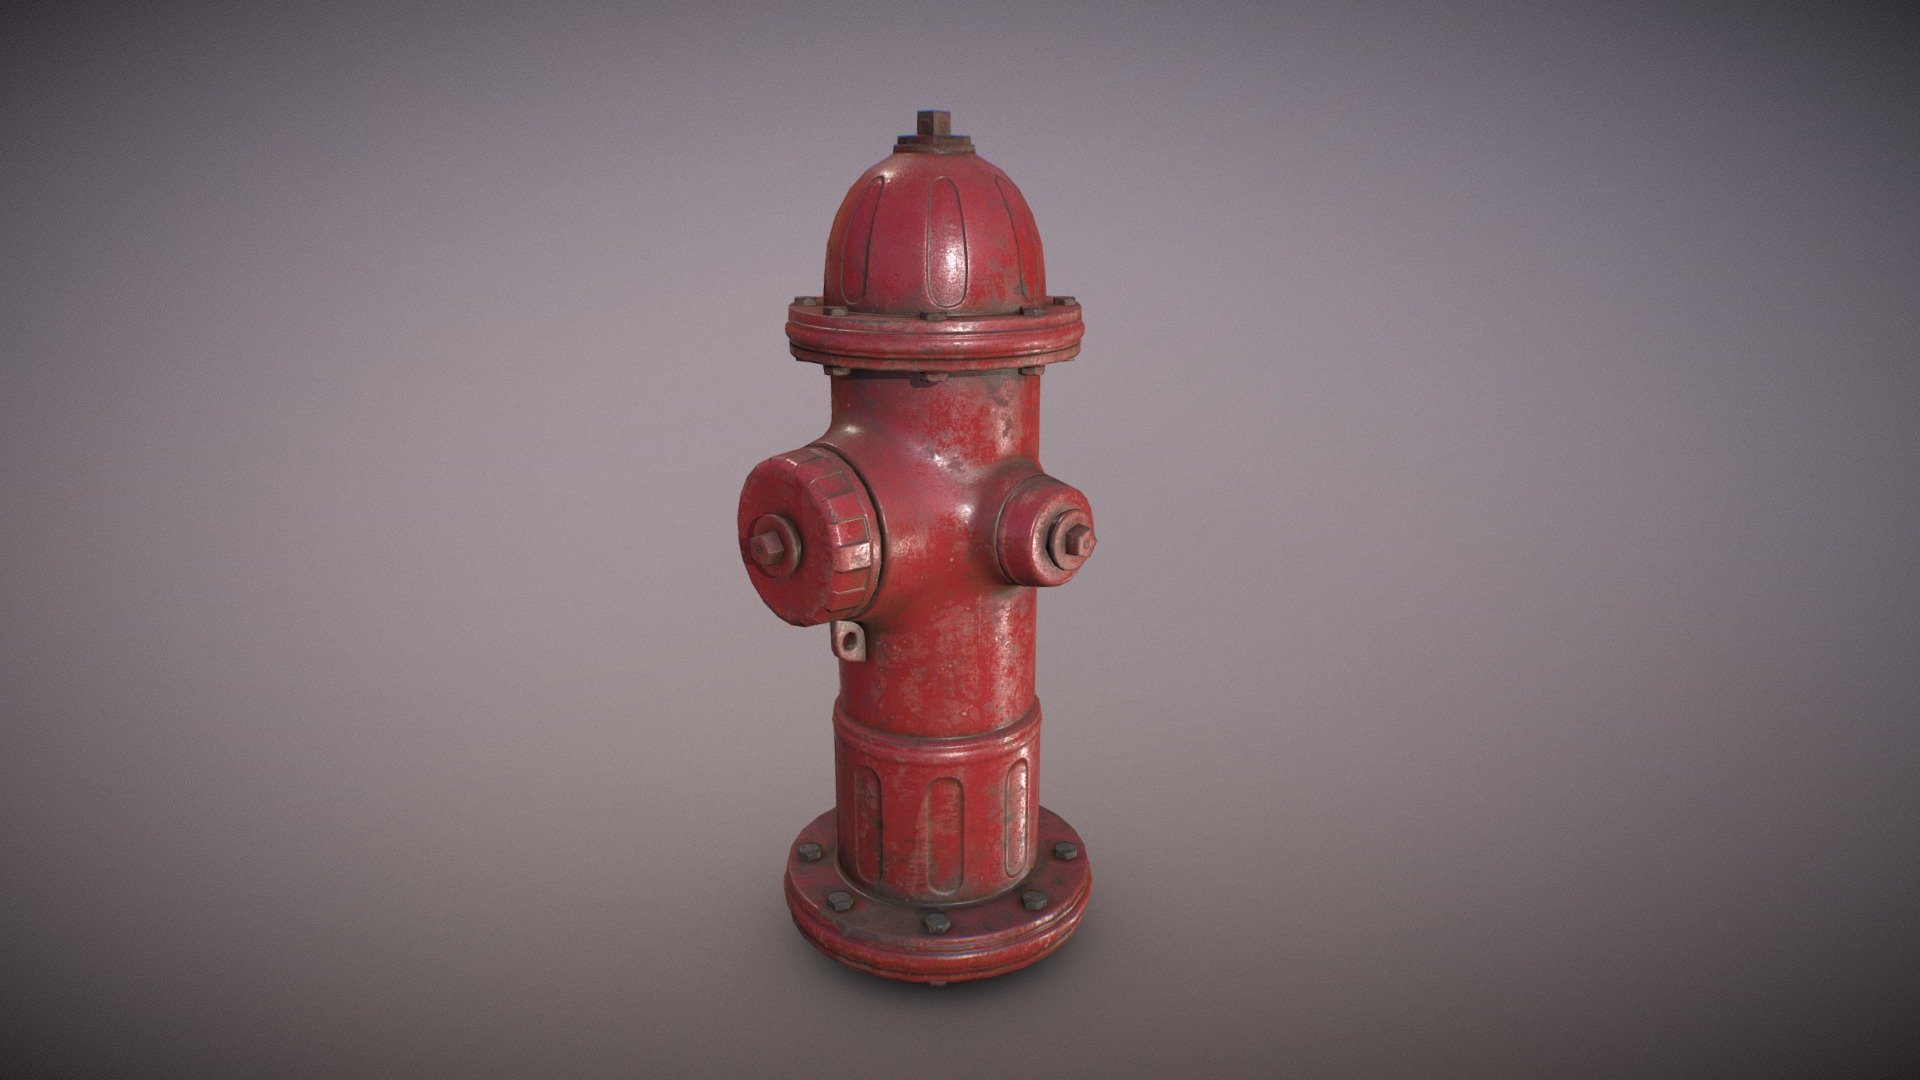 Low Poly Fire Hydrant 3D model with 2 PBR texture sets (clean and diry):




Real-world scale and centered.

The unit of measurement used for the model is centimeters

Polys: 1809 (Converted to triangles: 3.503)

Created in 3DS Max 2021

Textured in Substance Painter

All branding and labels are custom made.

PBR material with 2048x2048 textures.

Texel density is approx. 2048. Texture can be reduced if needed.

Provided Maps (cleand and dirty):




Albedo

Normal

Roughness

Metalness

AO

Formats Incuded - MAX / BLEND / OBJ / FBX

This model can be used for any game, film, personal project, etc. You may not resell or redistribute any content - Fire Hydrant - Low Poly - Buy Royalty Free 3D model by MSWoodvine 3d model